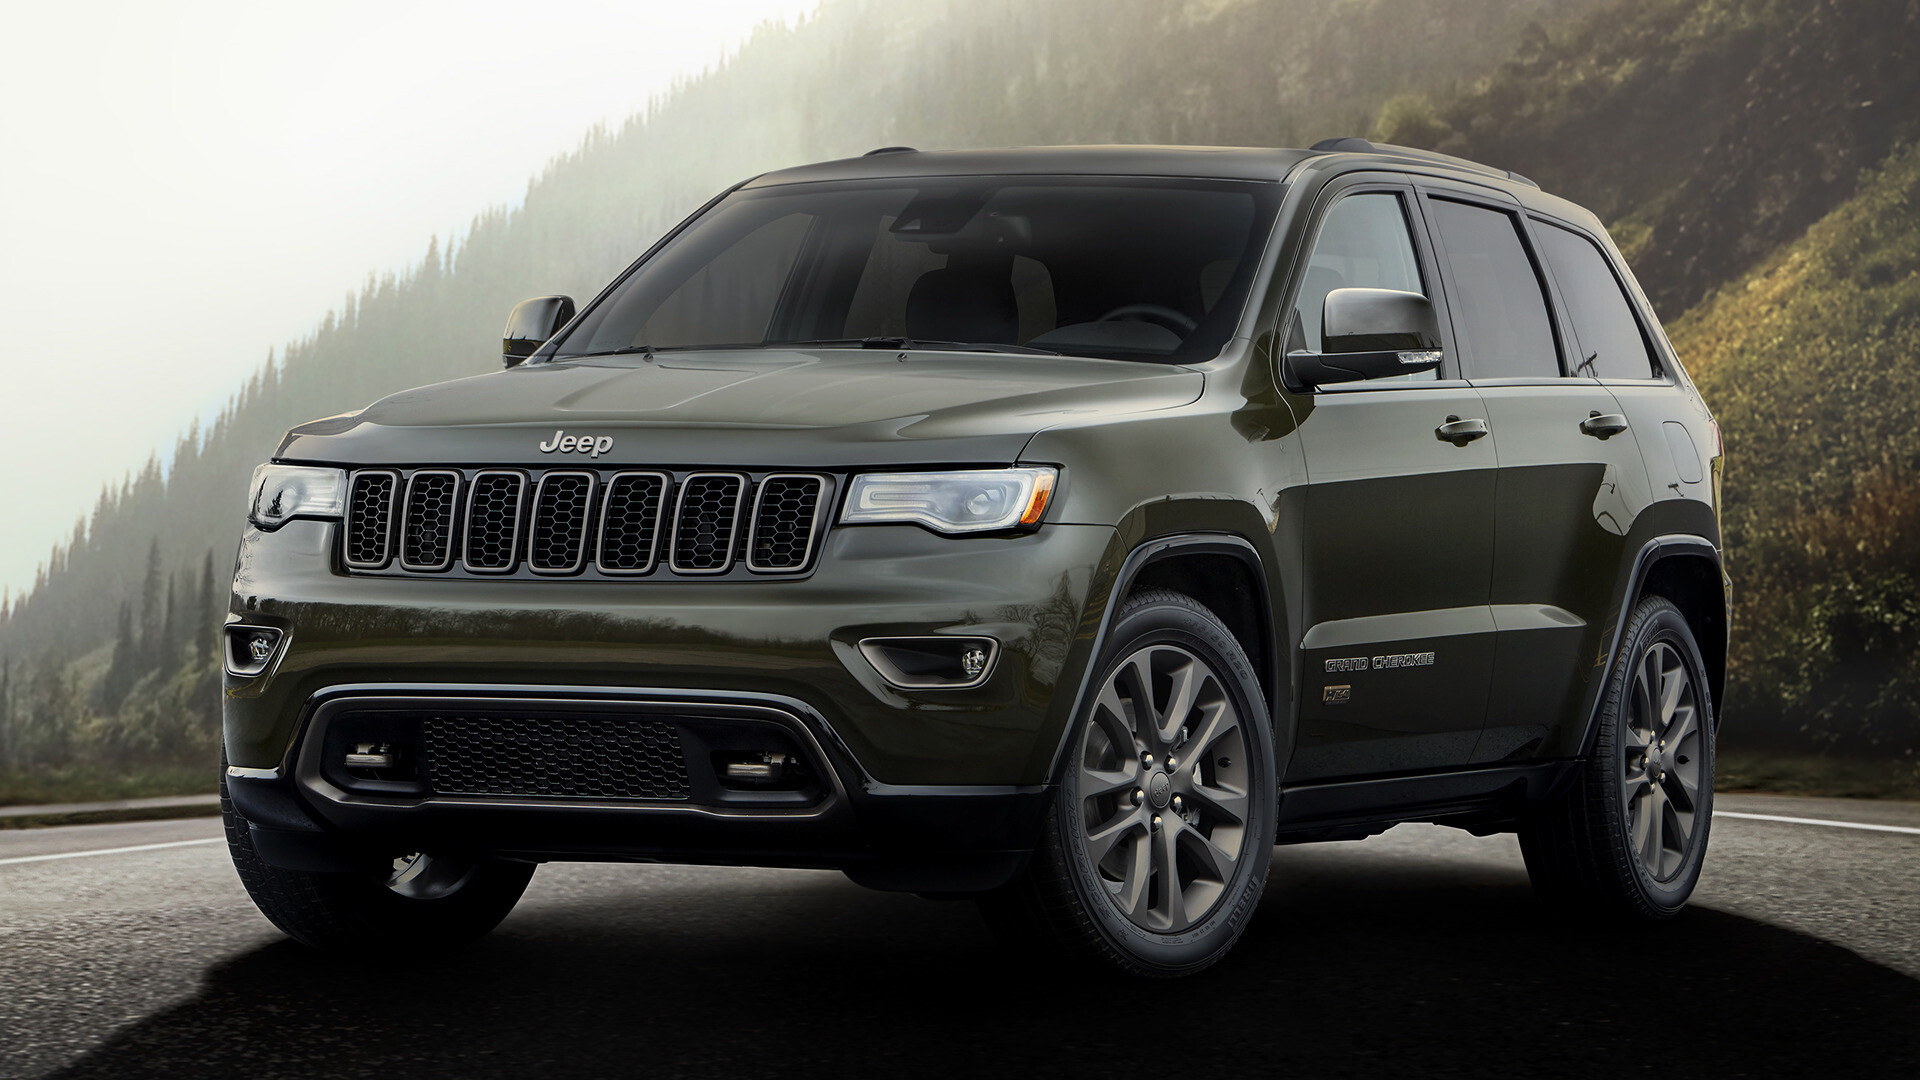 Jeep Grand Cherokee: 75th Anniversary Edition, Powered by 3.6L V6 Gas Engine with 8-Speed Automatic transmission. 1920x1080 Full HD Background.